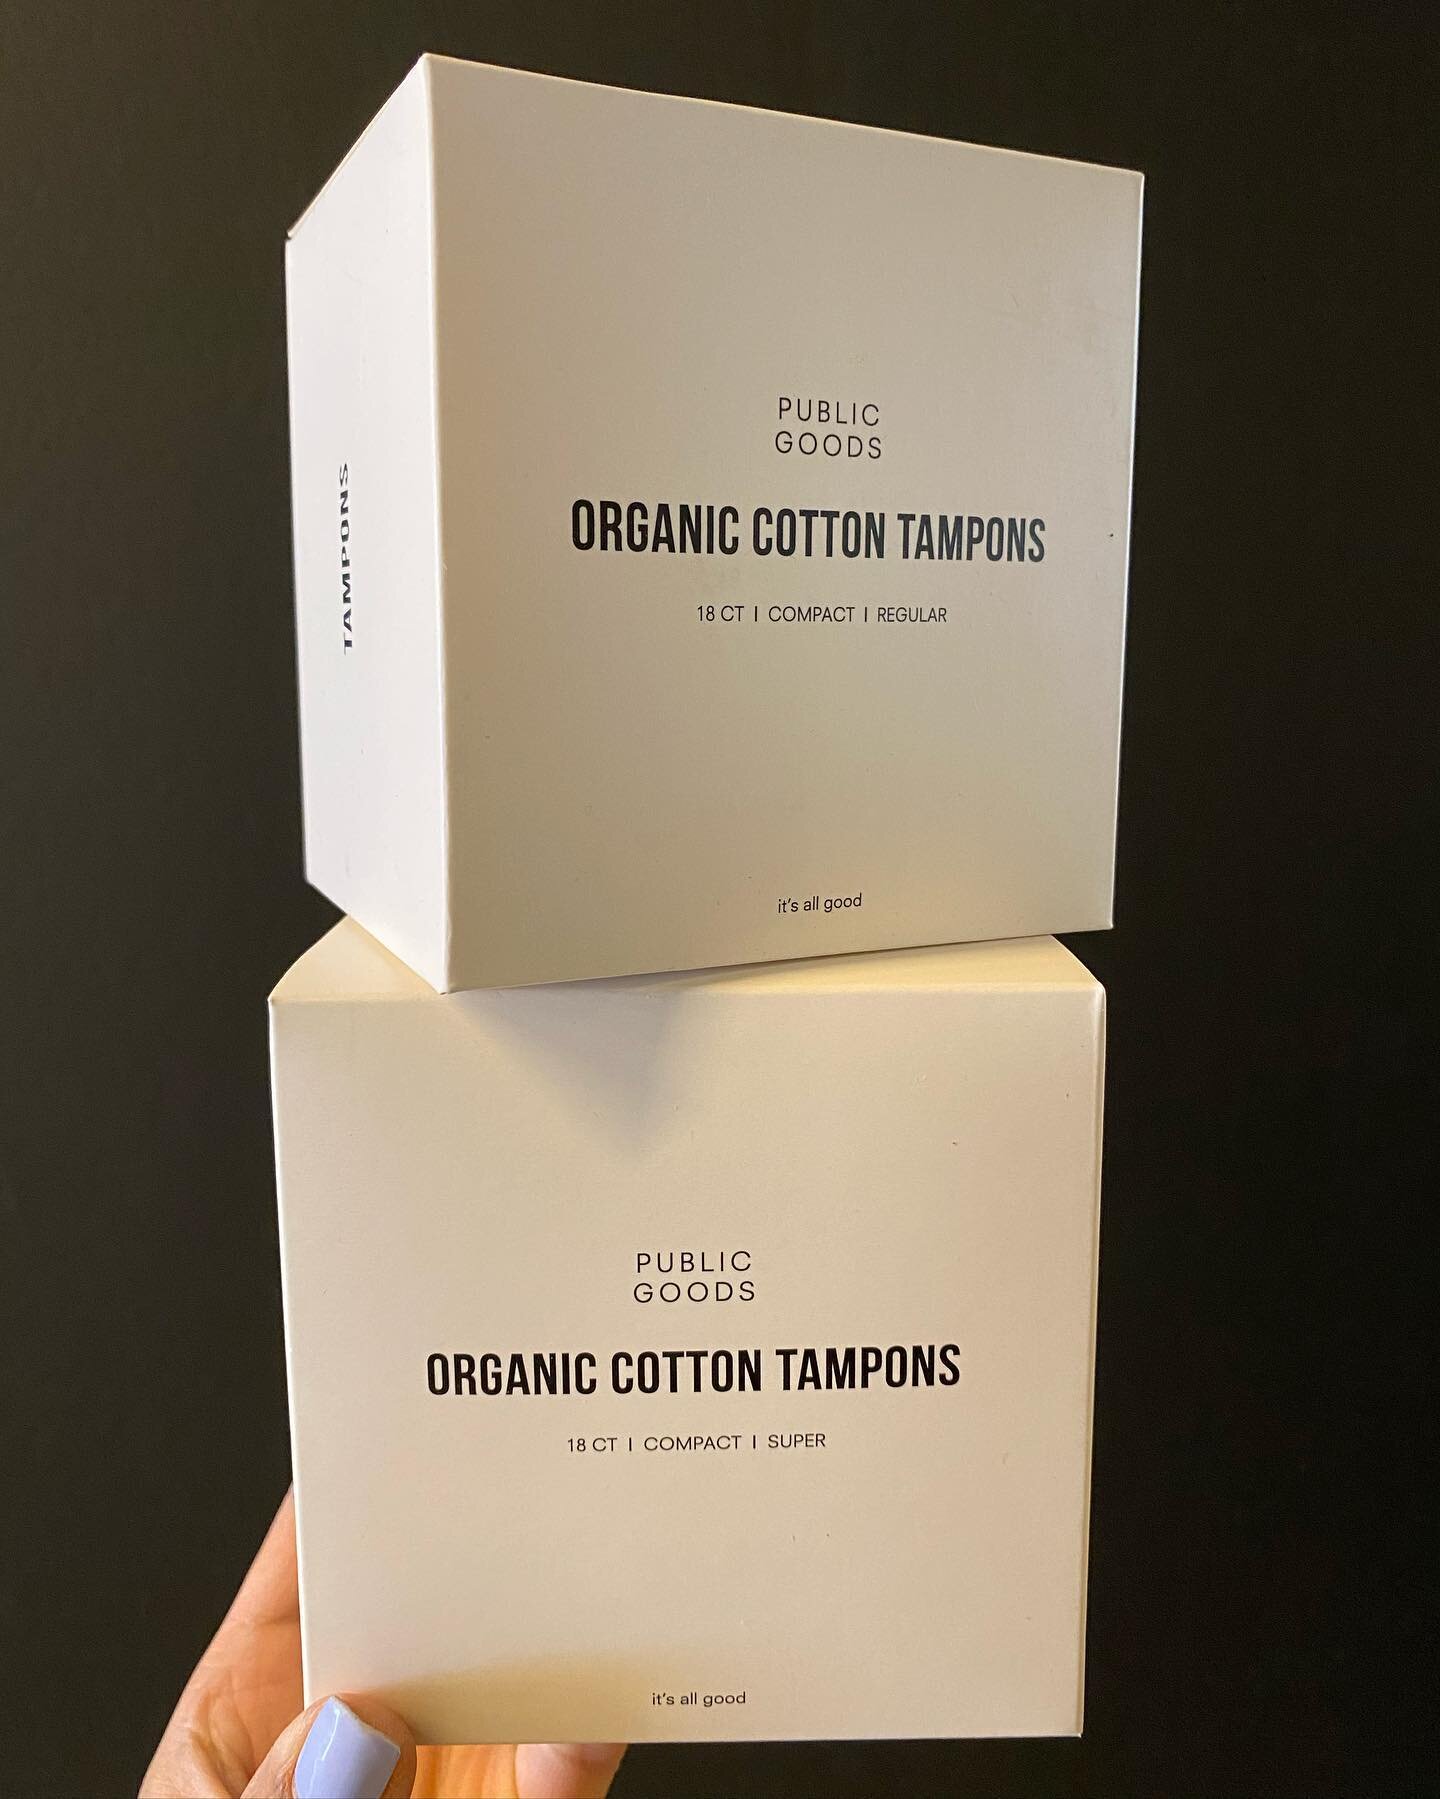 Ditch the tampons with mysterious ingredients and spring for these ones made out of organic cotton. Cotton without added synthetic fibers is more eco-friendly, and not to mention, more friendly to your vagina!

$9.99

#periodcare #period #ecofriendly